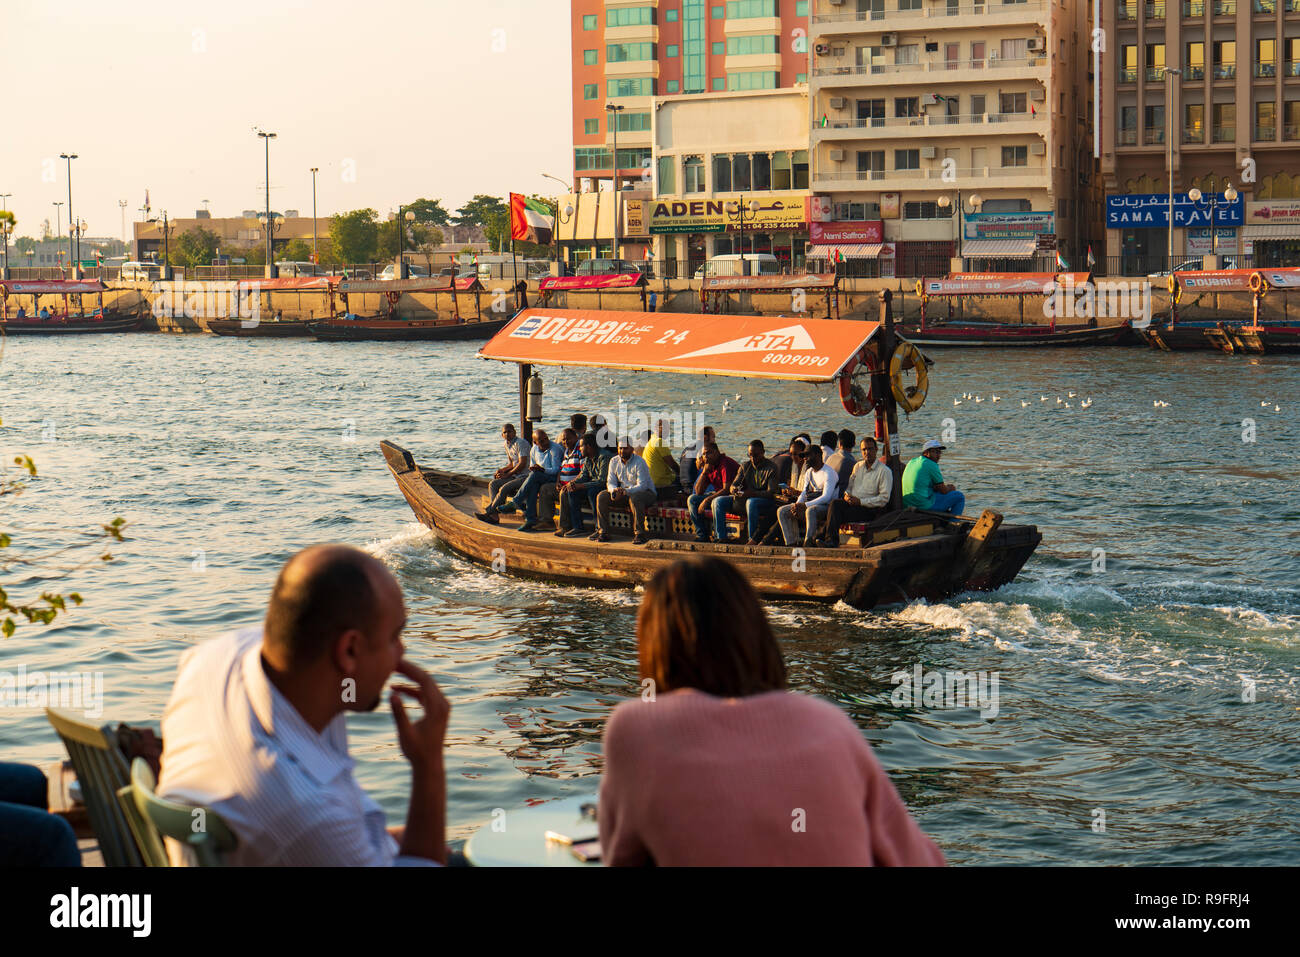 People in cafe beside The Creek at sunset in Old Dubai, United Arab Emirates. Stock Photo